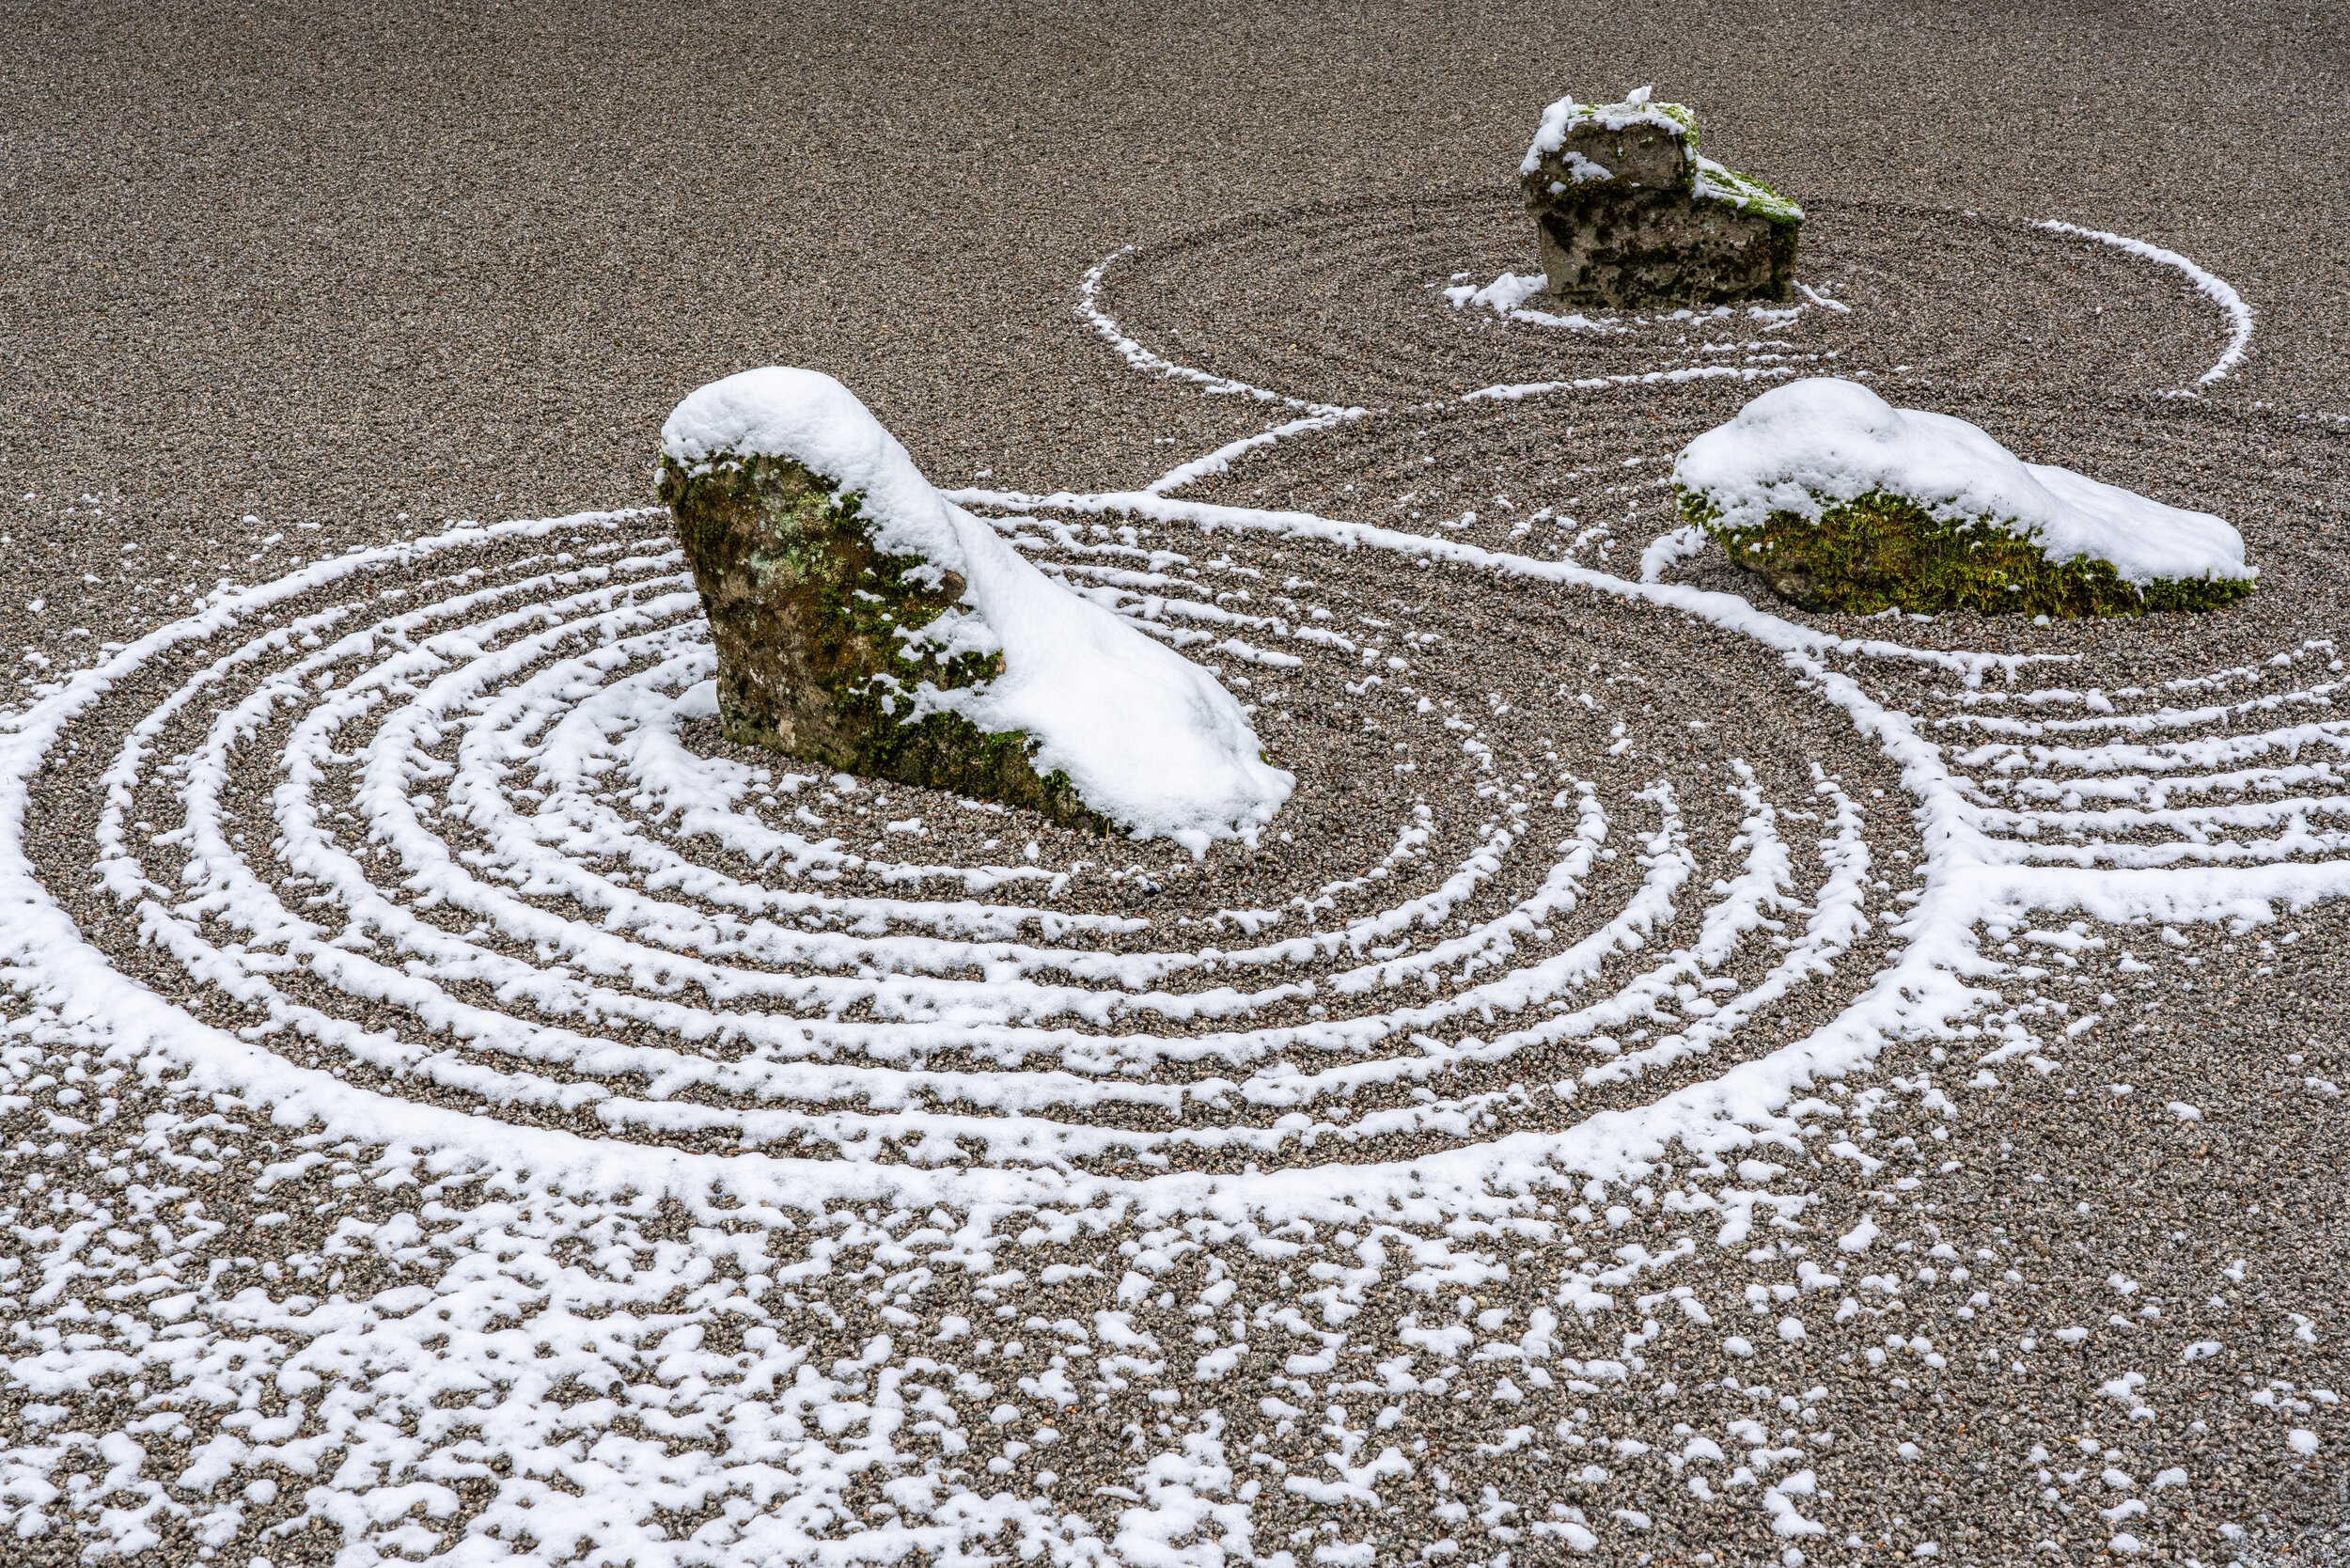 Snow, Sand, and Rock, Japanese Garden